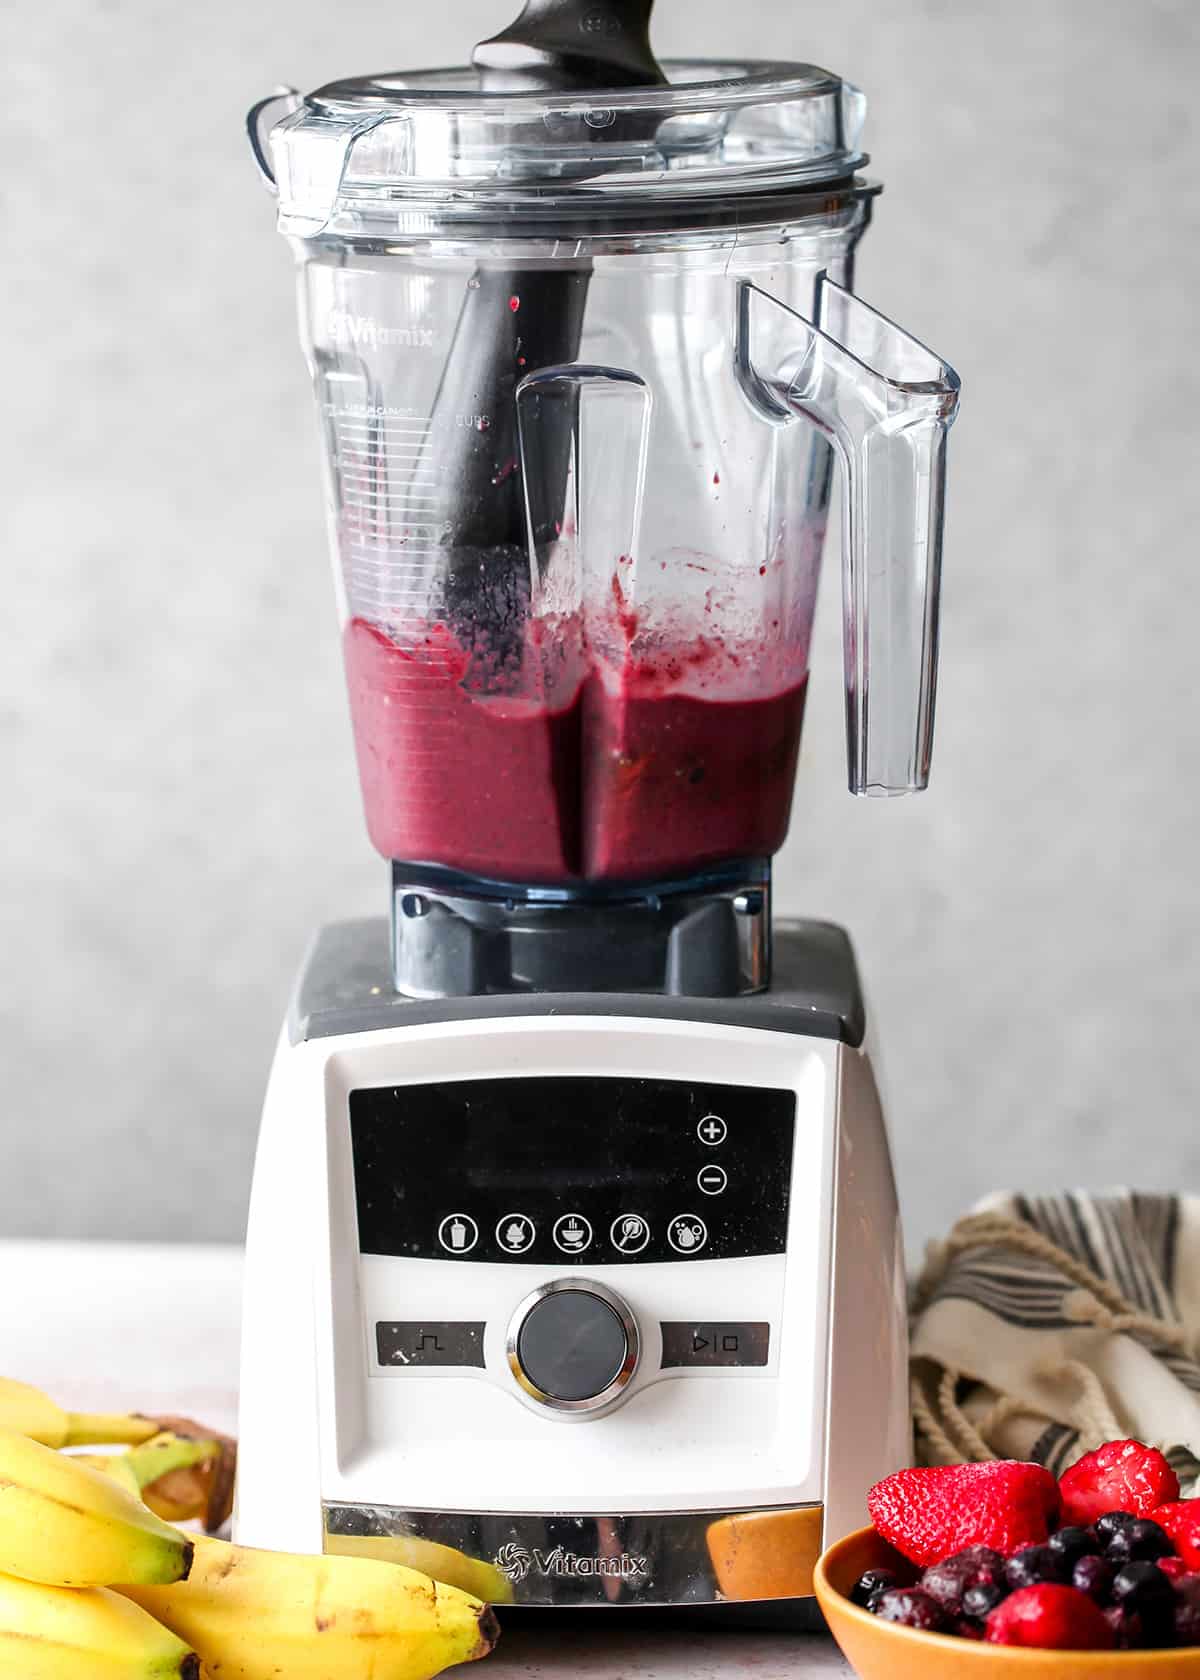 How to Make an Acai Bowl - acai mixture blended in a Vitamix blender 